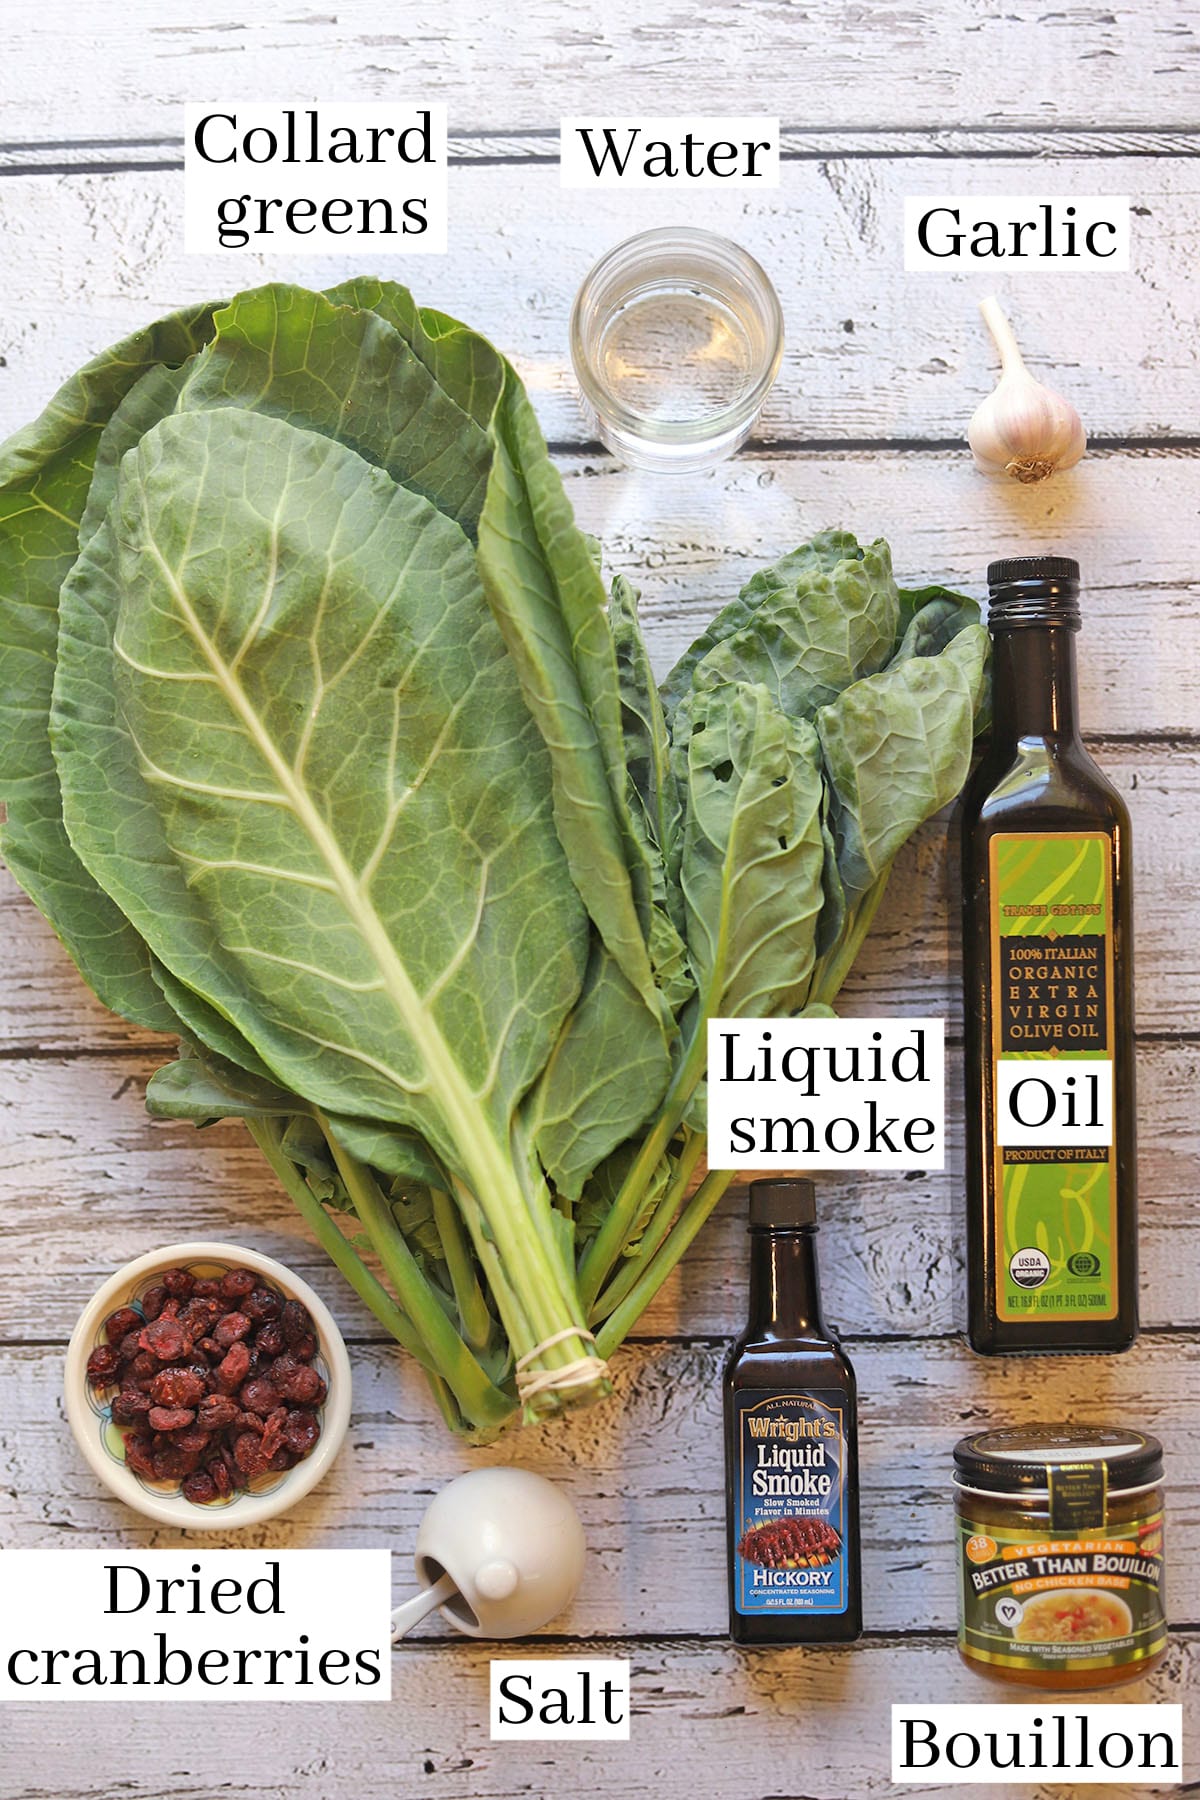 Labeled ingredients for collard greens with liquid smoke.